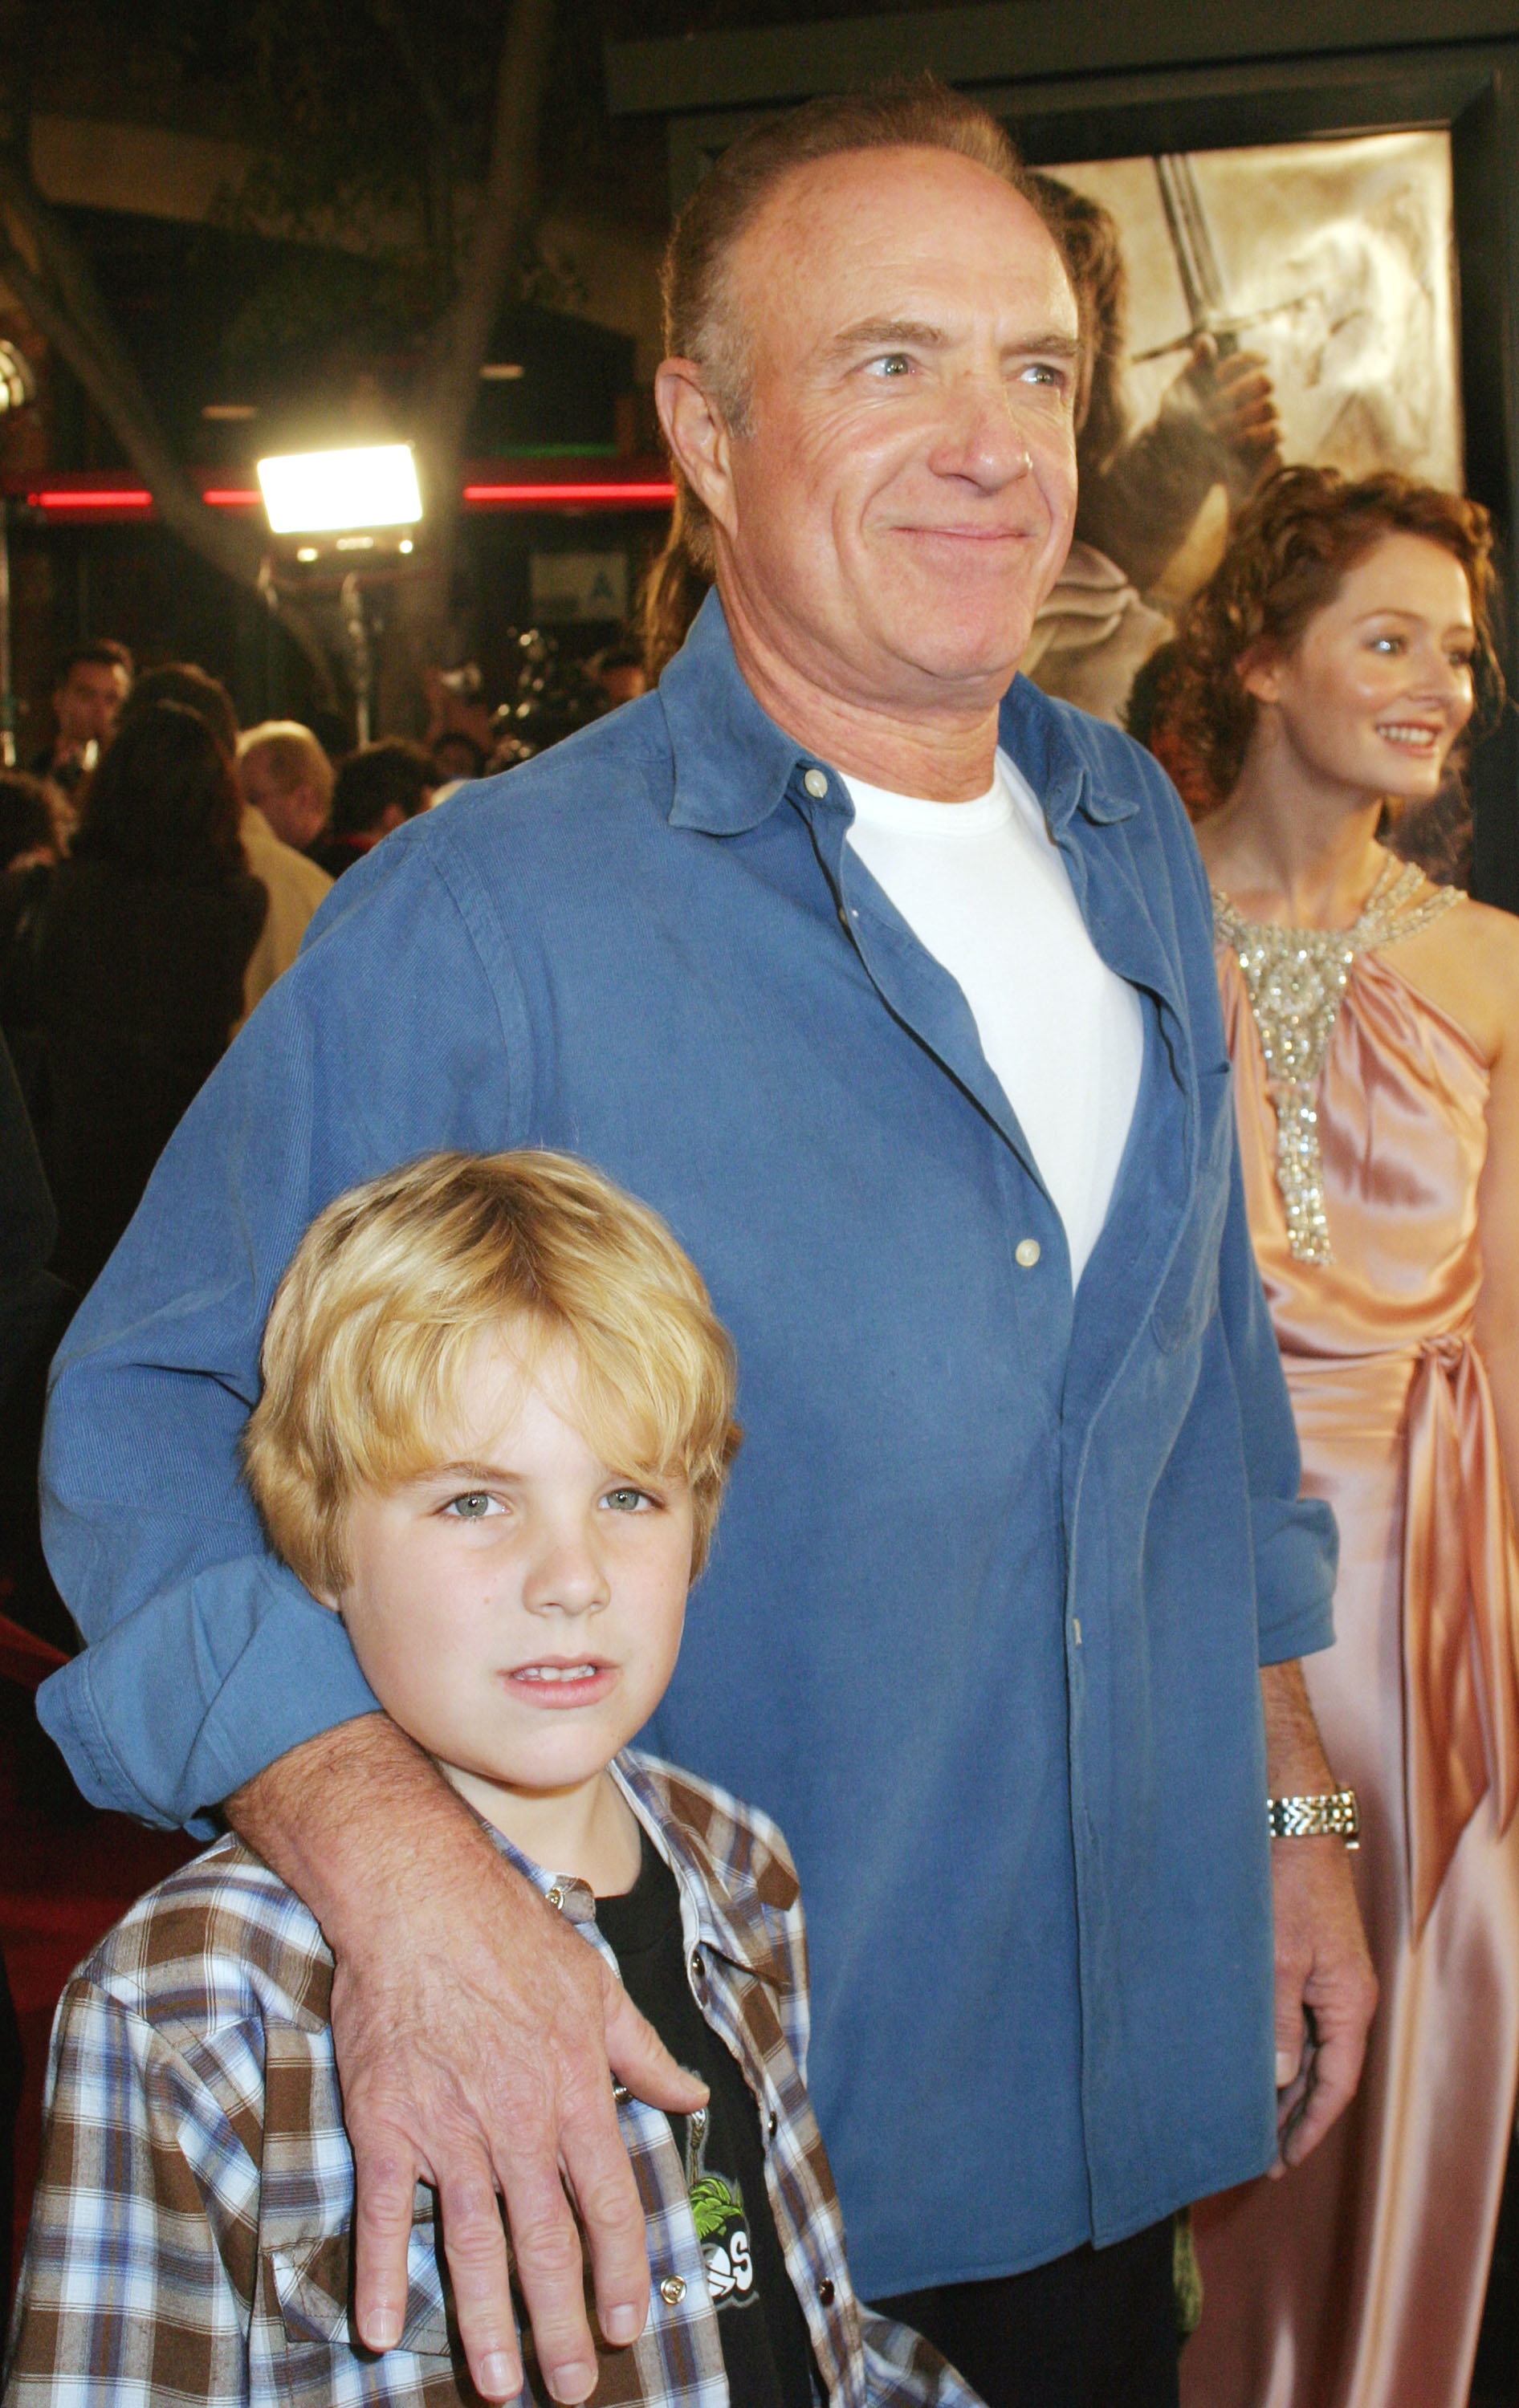 James Caan und Jacob Nicholas Caan bei der Premiere von "The Lord of the Rings: The Return of the King" am 3. Dezember 2003 in Los Angeles | Quelle: Getty Images